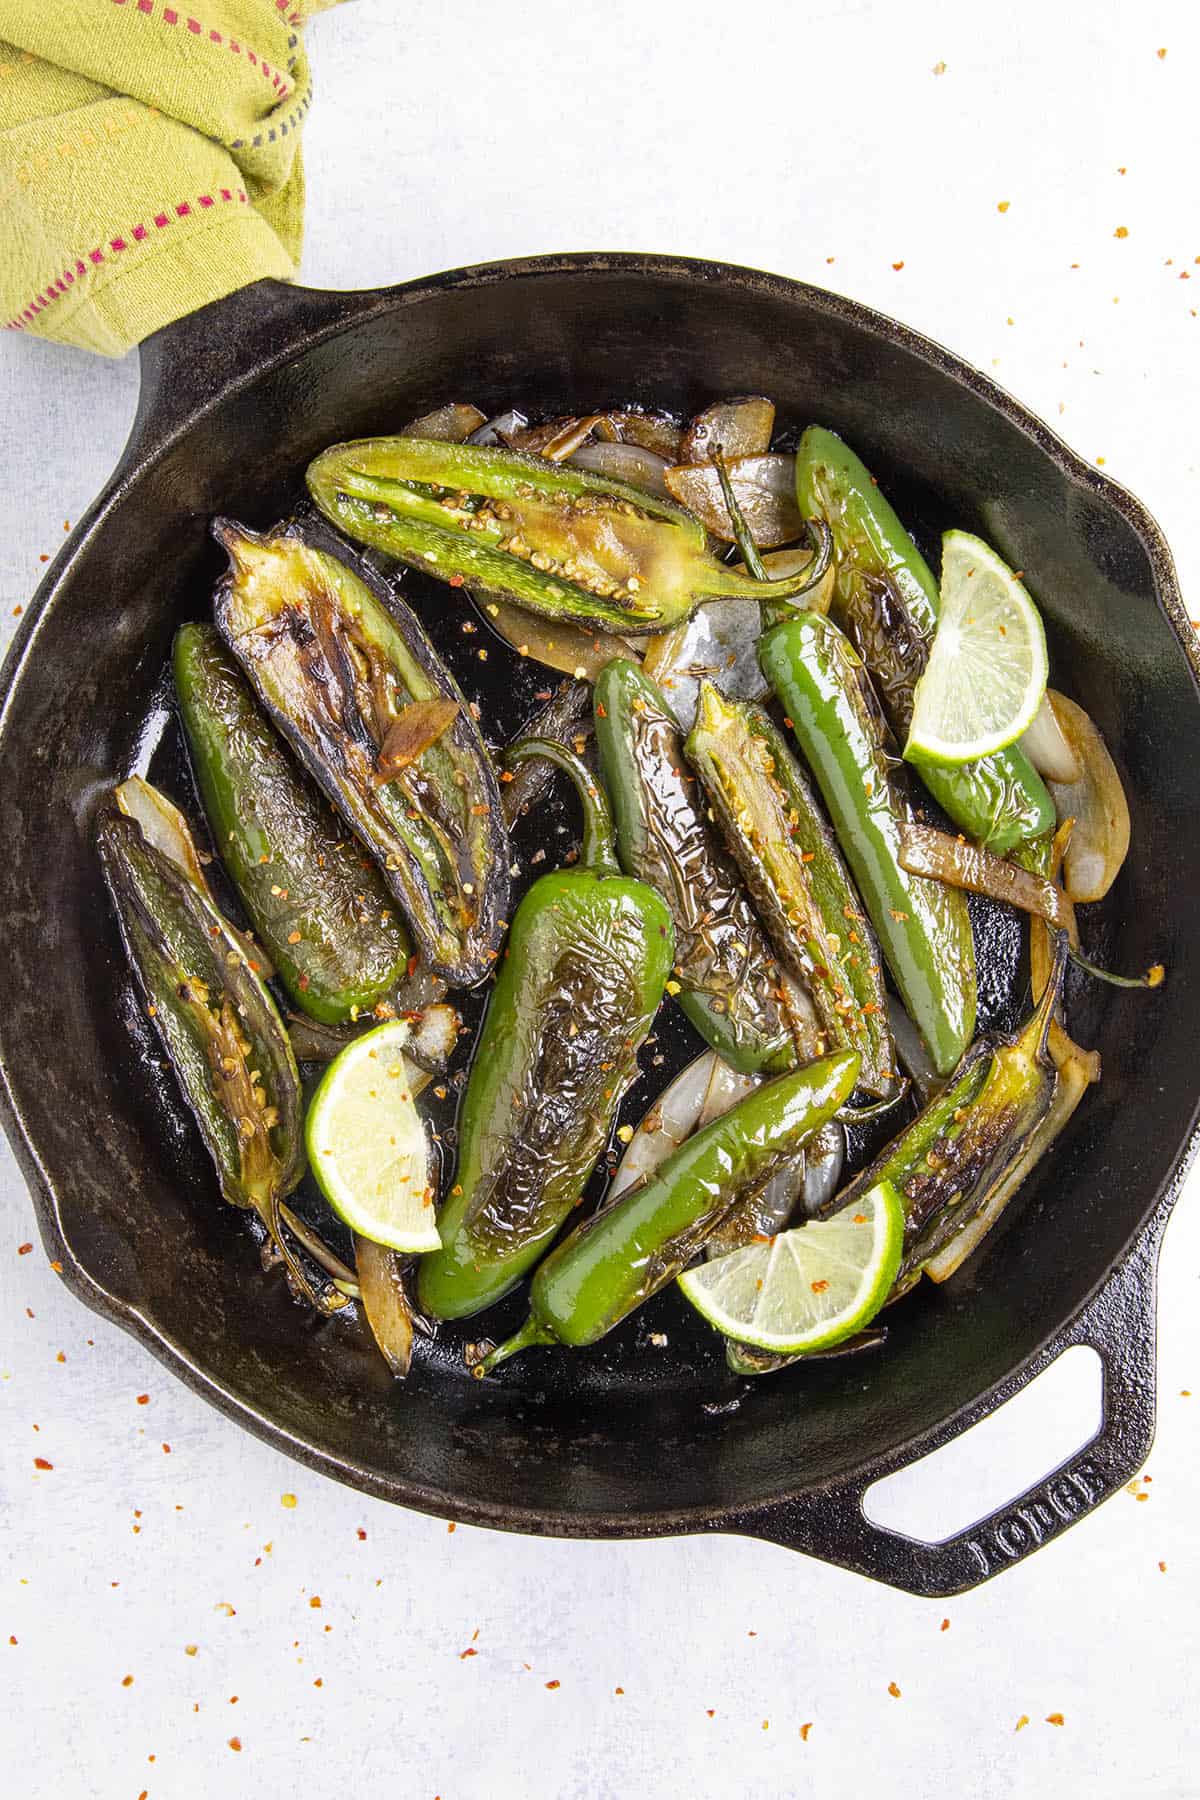 Chiles Toreados, or blistered chiles, just off the stove top